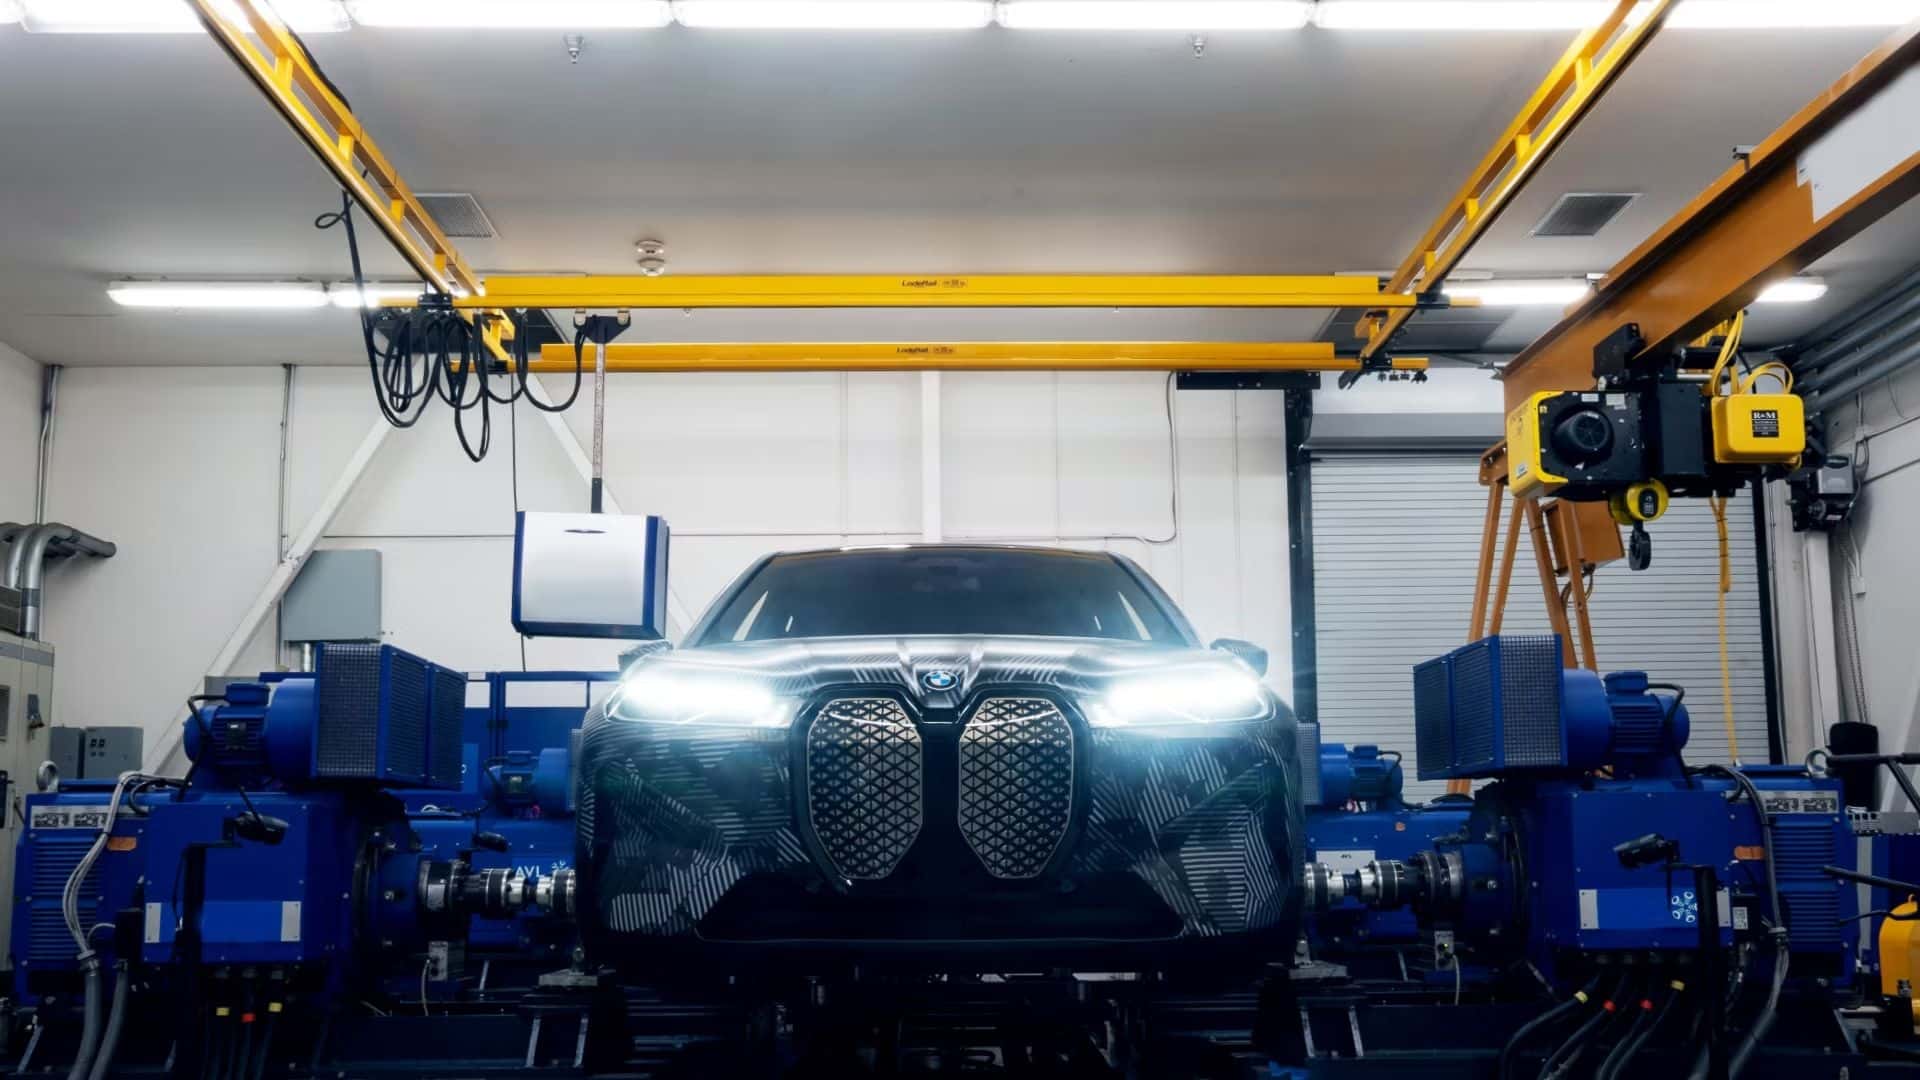 Our Subsequent Power’s ‘Gemini’ Battery Doubled A BMW iX’s Vary To 608 Miles Unveiled: Uncover Auto Excellence at Autoxyon